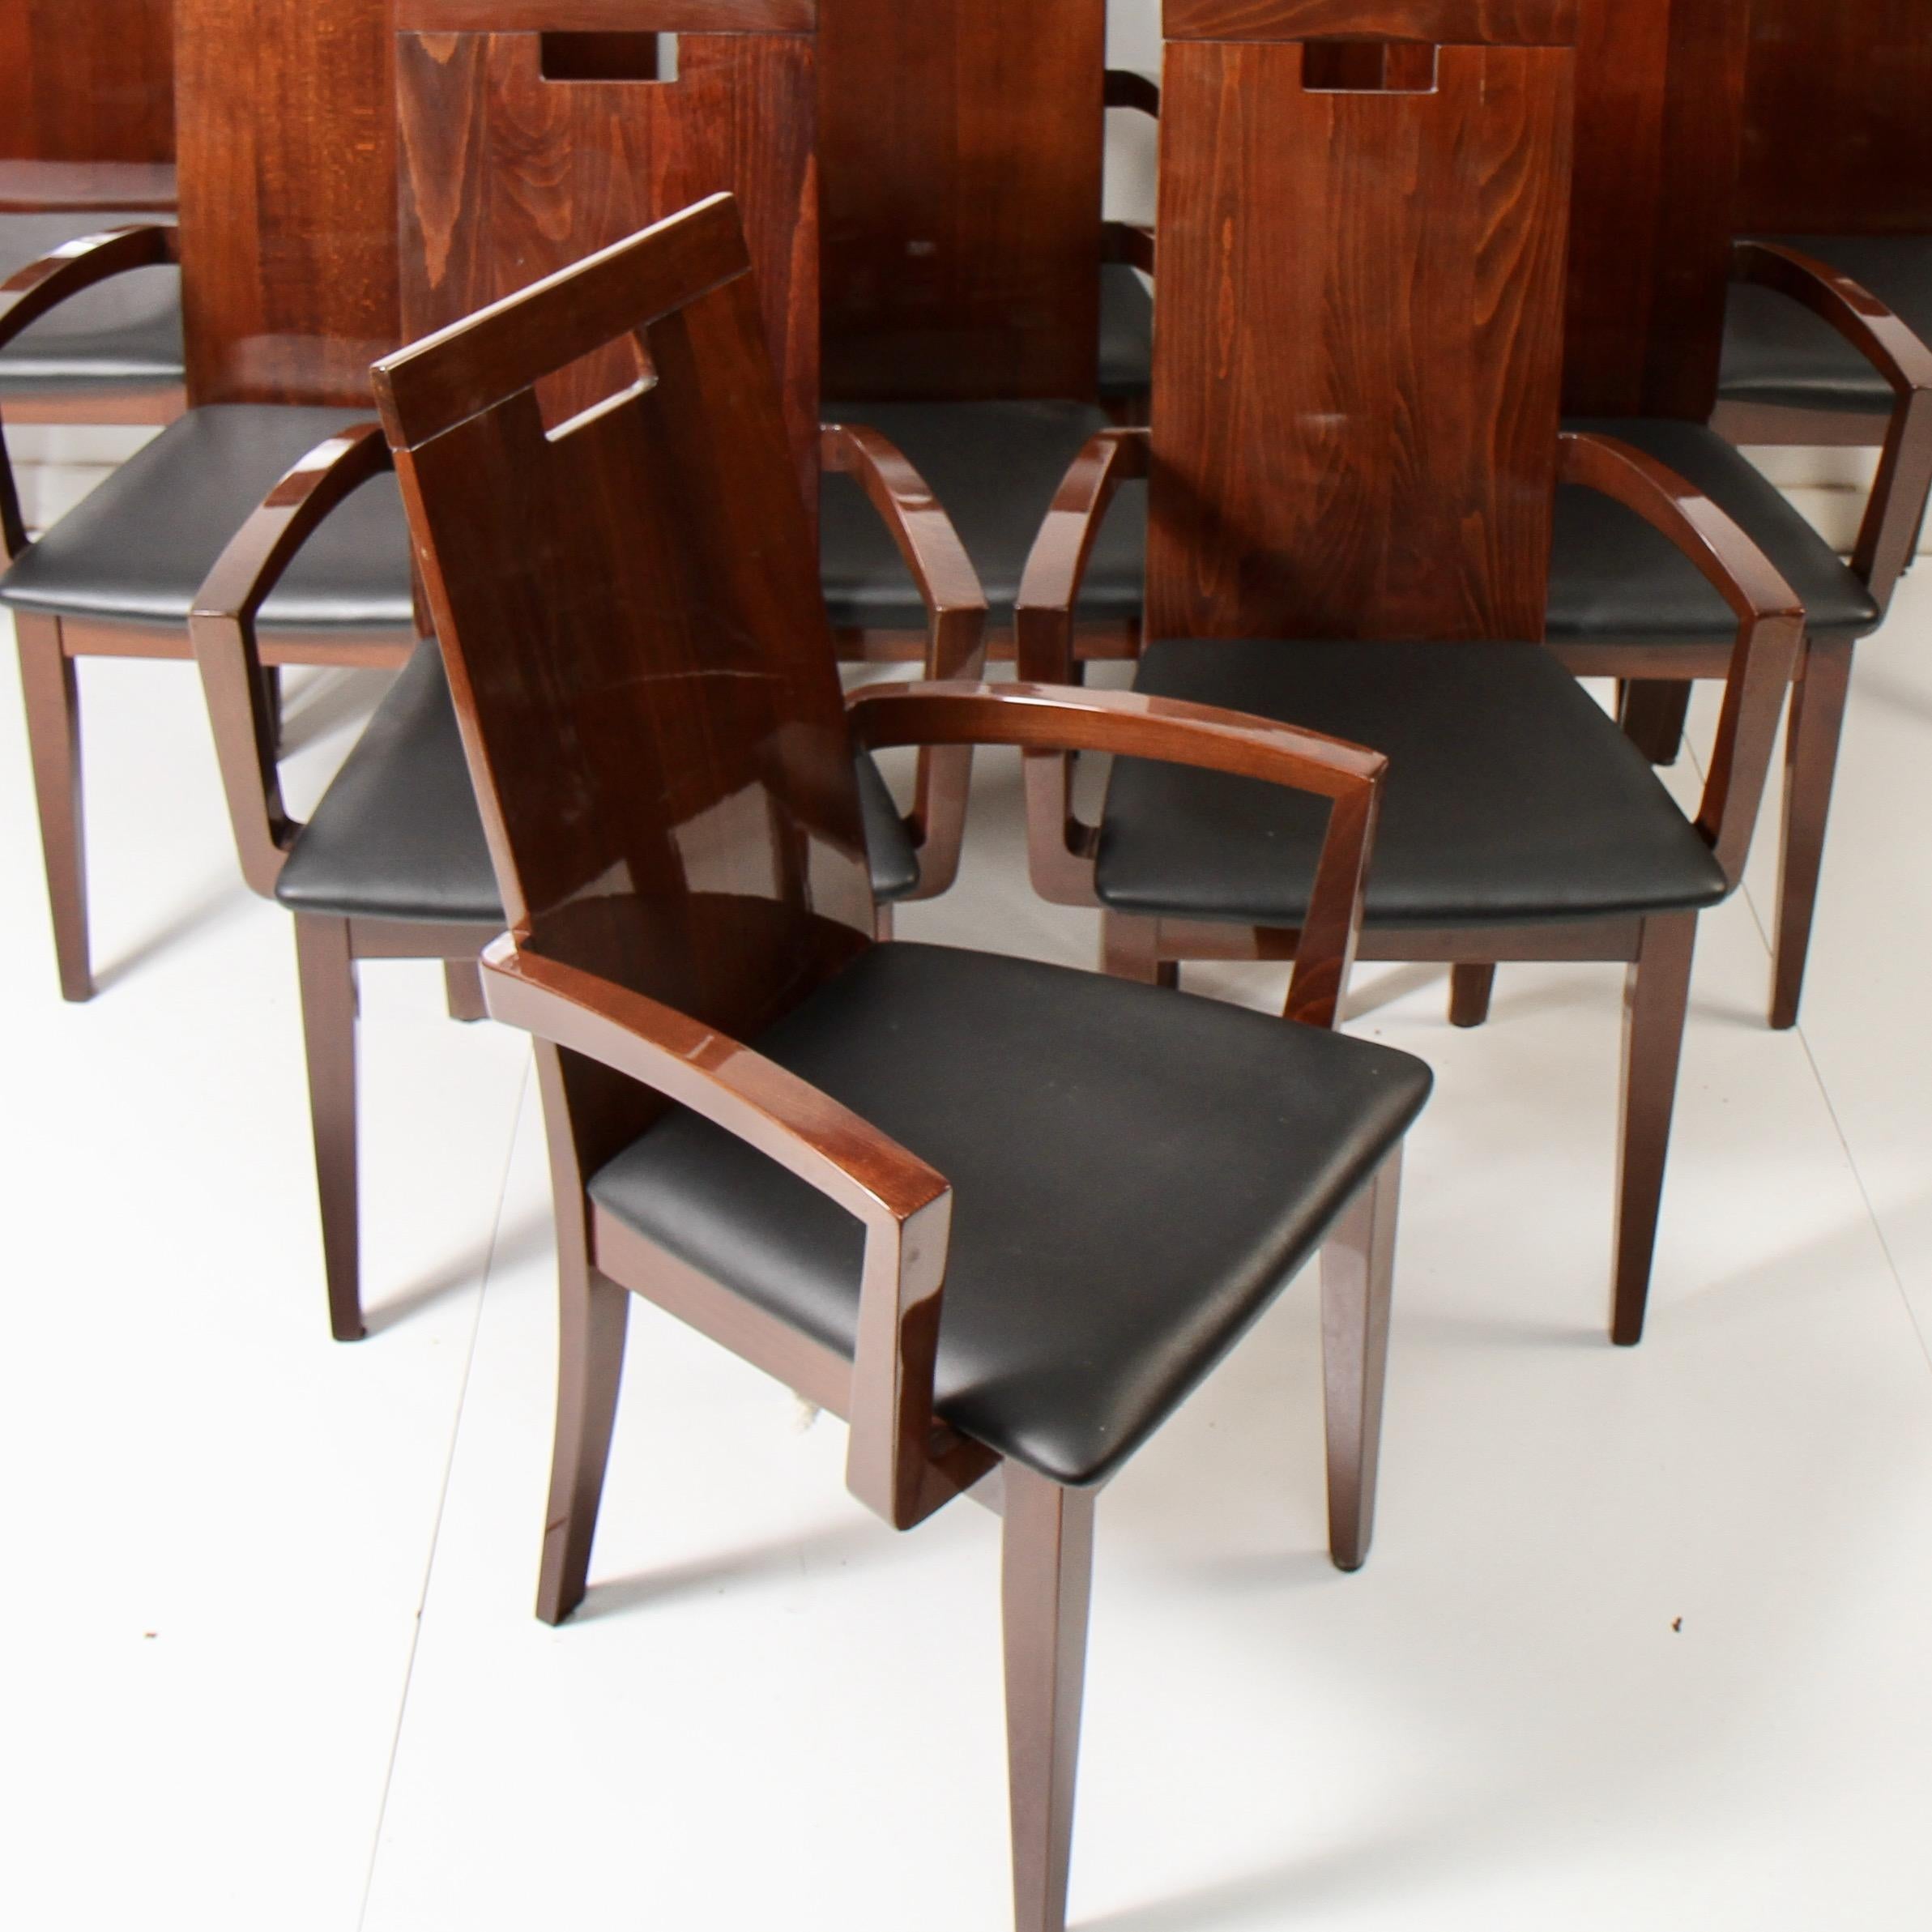 Recent 21st century dining set featuring 7 armchairs and 4 side chairs. Made of solid walnut with leather seats by Italian modern furniture maker Excelsior Designs. Blemishes in photos are either smudges or light reflection. Chairs in good condition